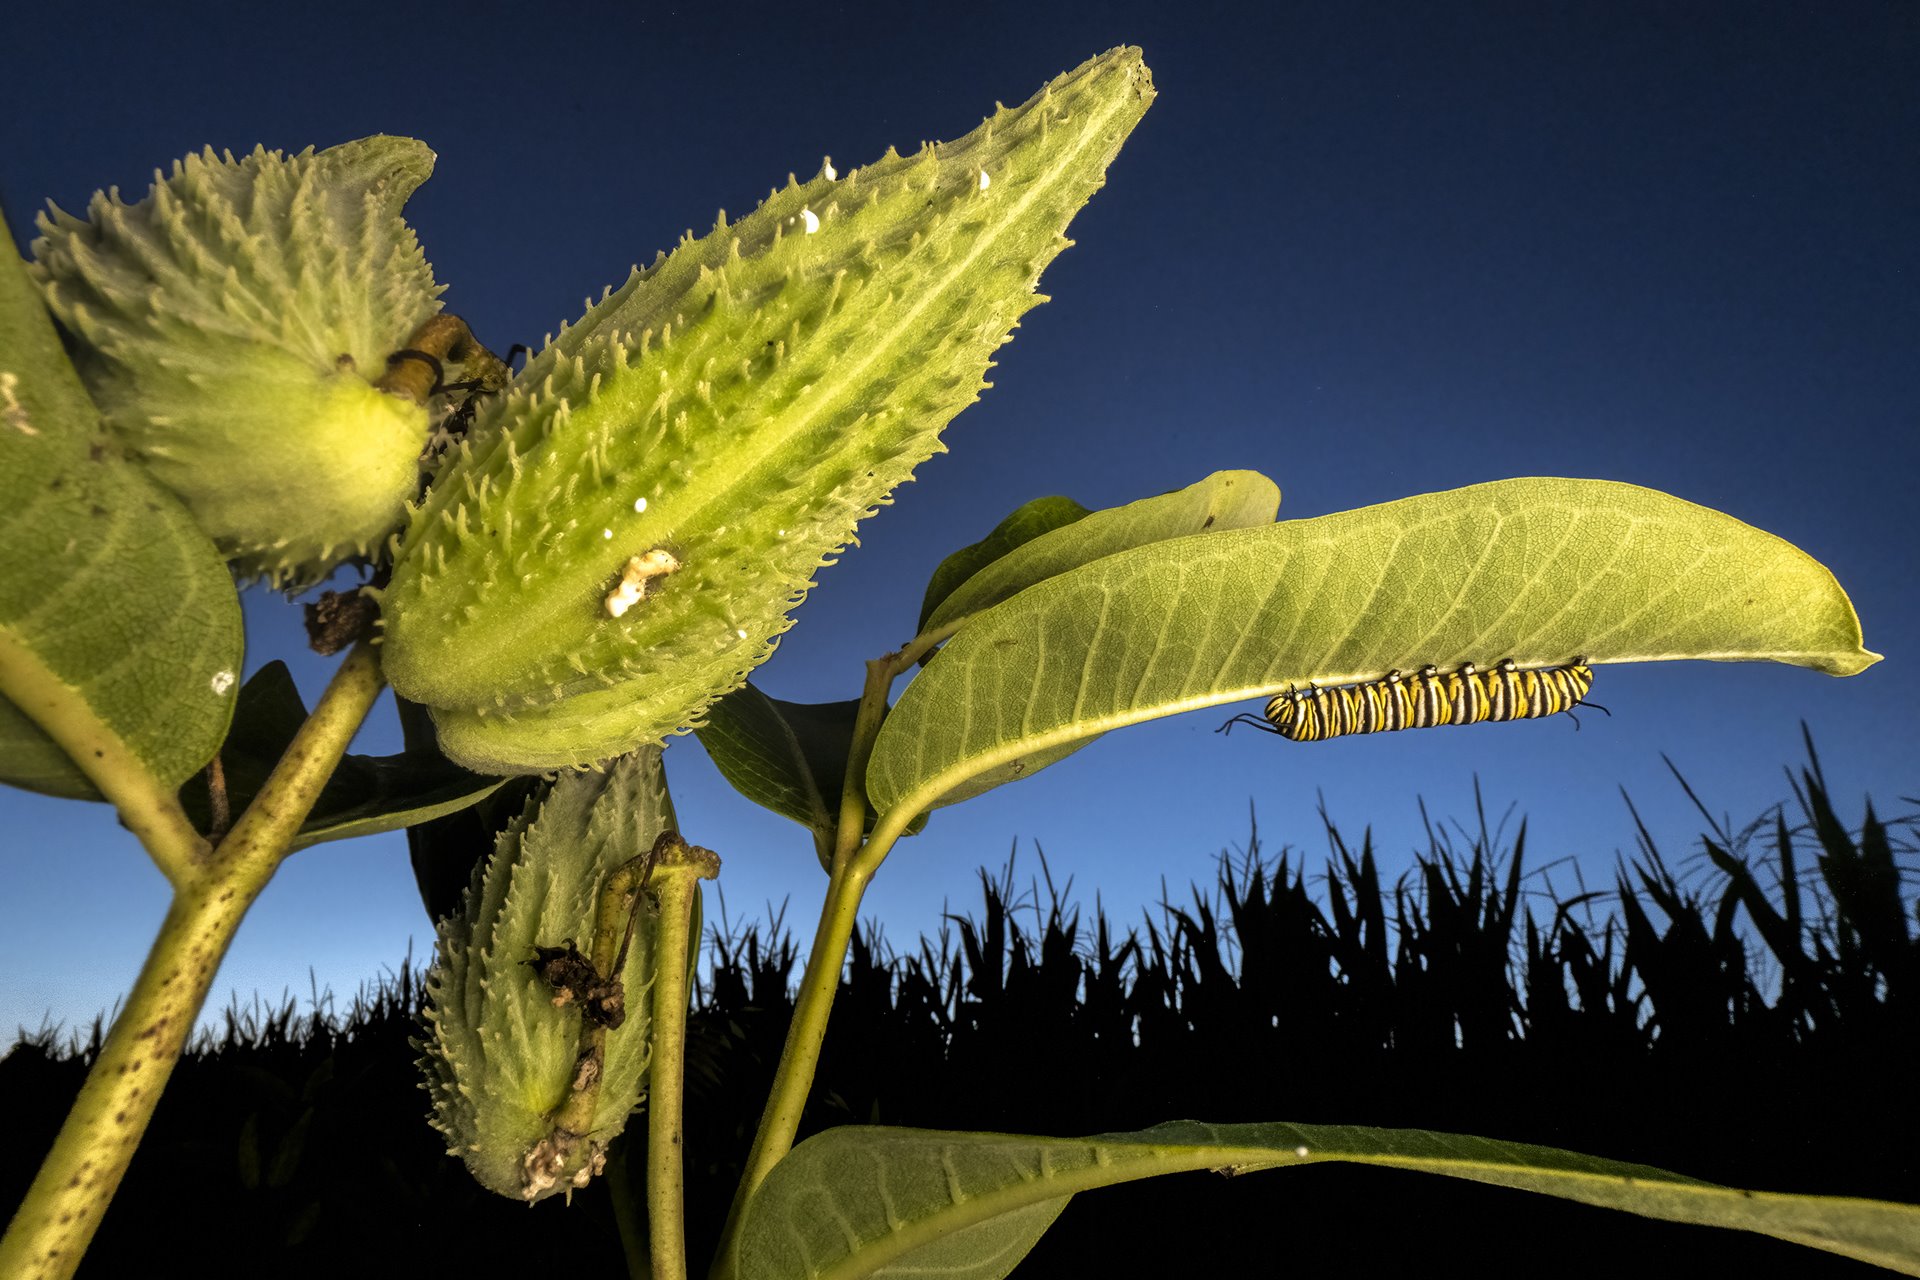 A monarch butterfly caterpillar rests overnight under a milkweed leaf, in Henderson, Minnesota, United States. Monarch caterpillars&rsquo; diet consists solely of milkweed, and they can consume 200 times their body weight of the toxic plant as they mature. That toxicity is passed on to the adult butterflies and serves as their primary defense against predators.&nbsp;